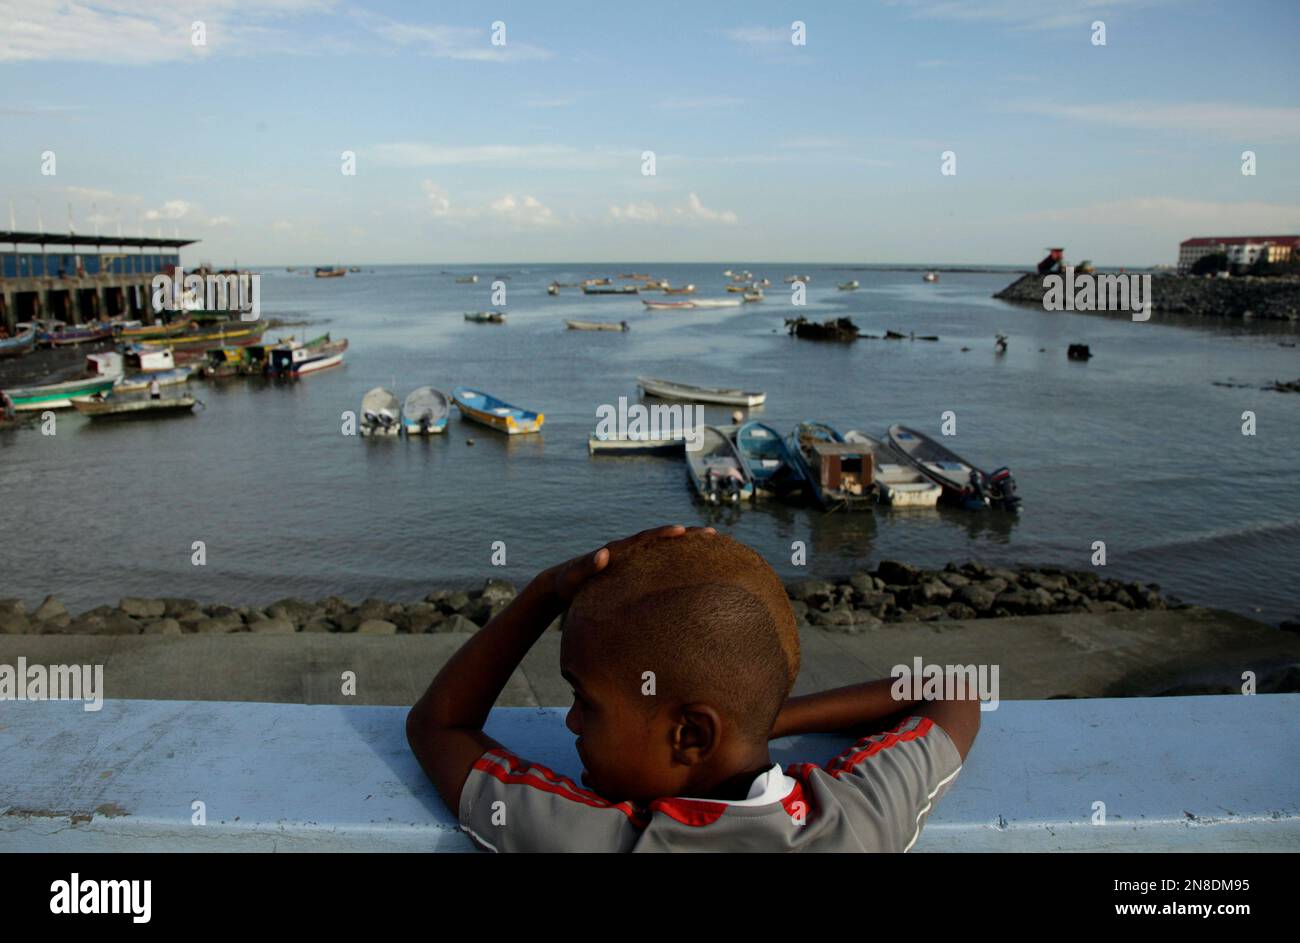 Ariel Alexis Cajar, 12, from Saboga Island, looks at fishing boats anchored  at the Panama bay in Panama City, Wednesday, Dec. 19, 2012. A poll released  Wednesday of nearly 150,000 people around